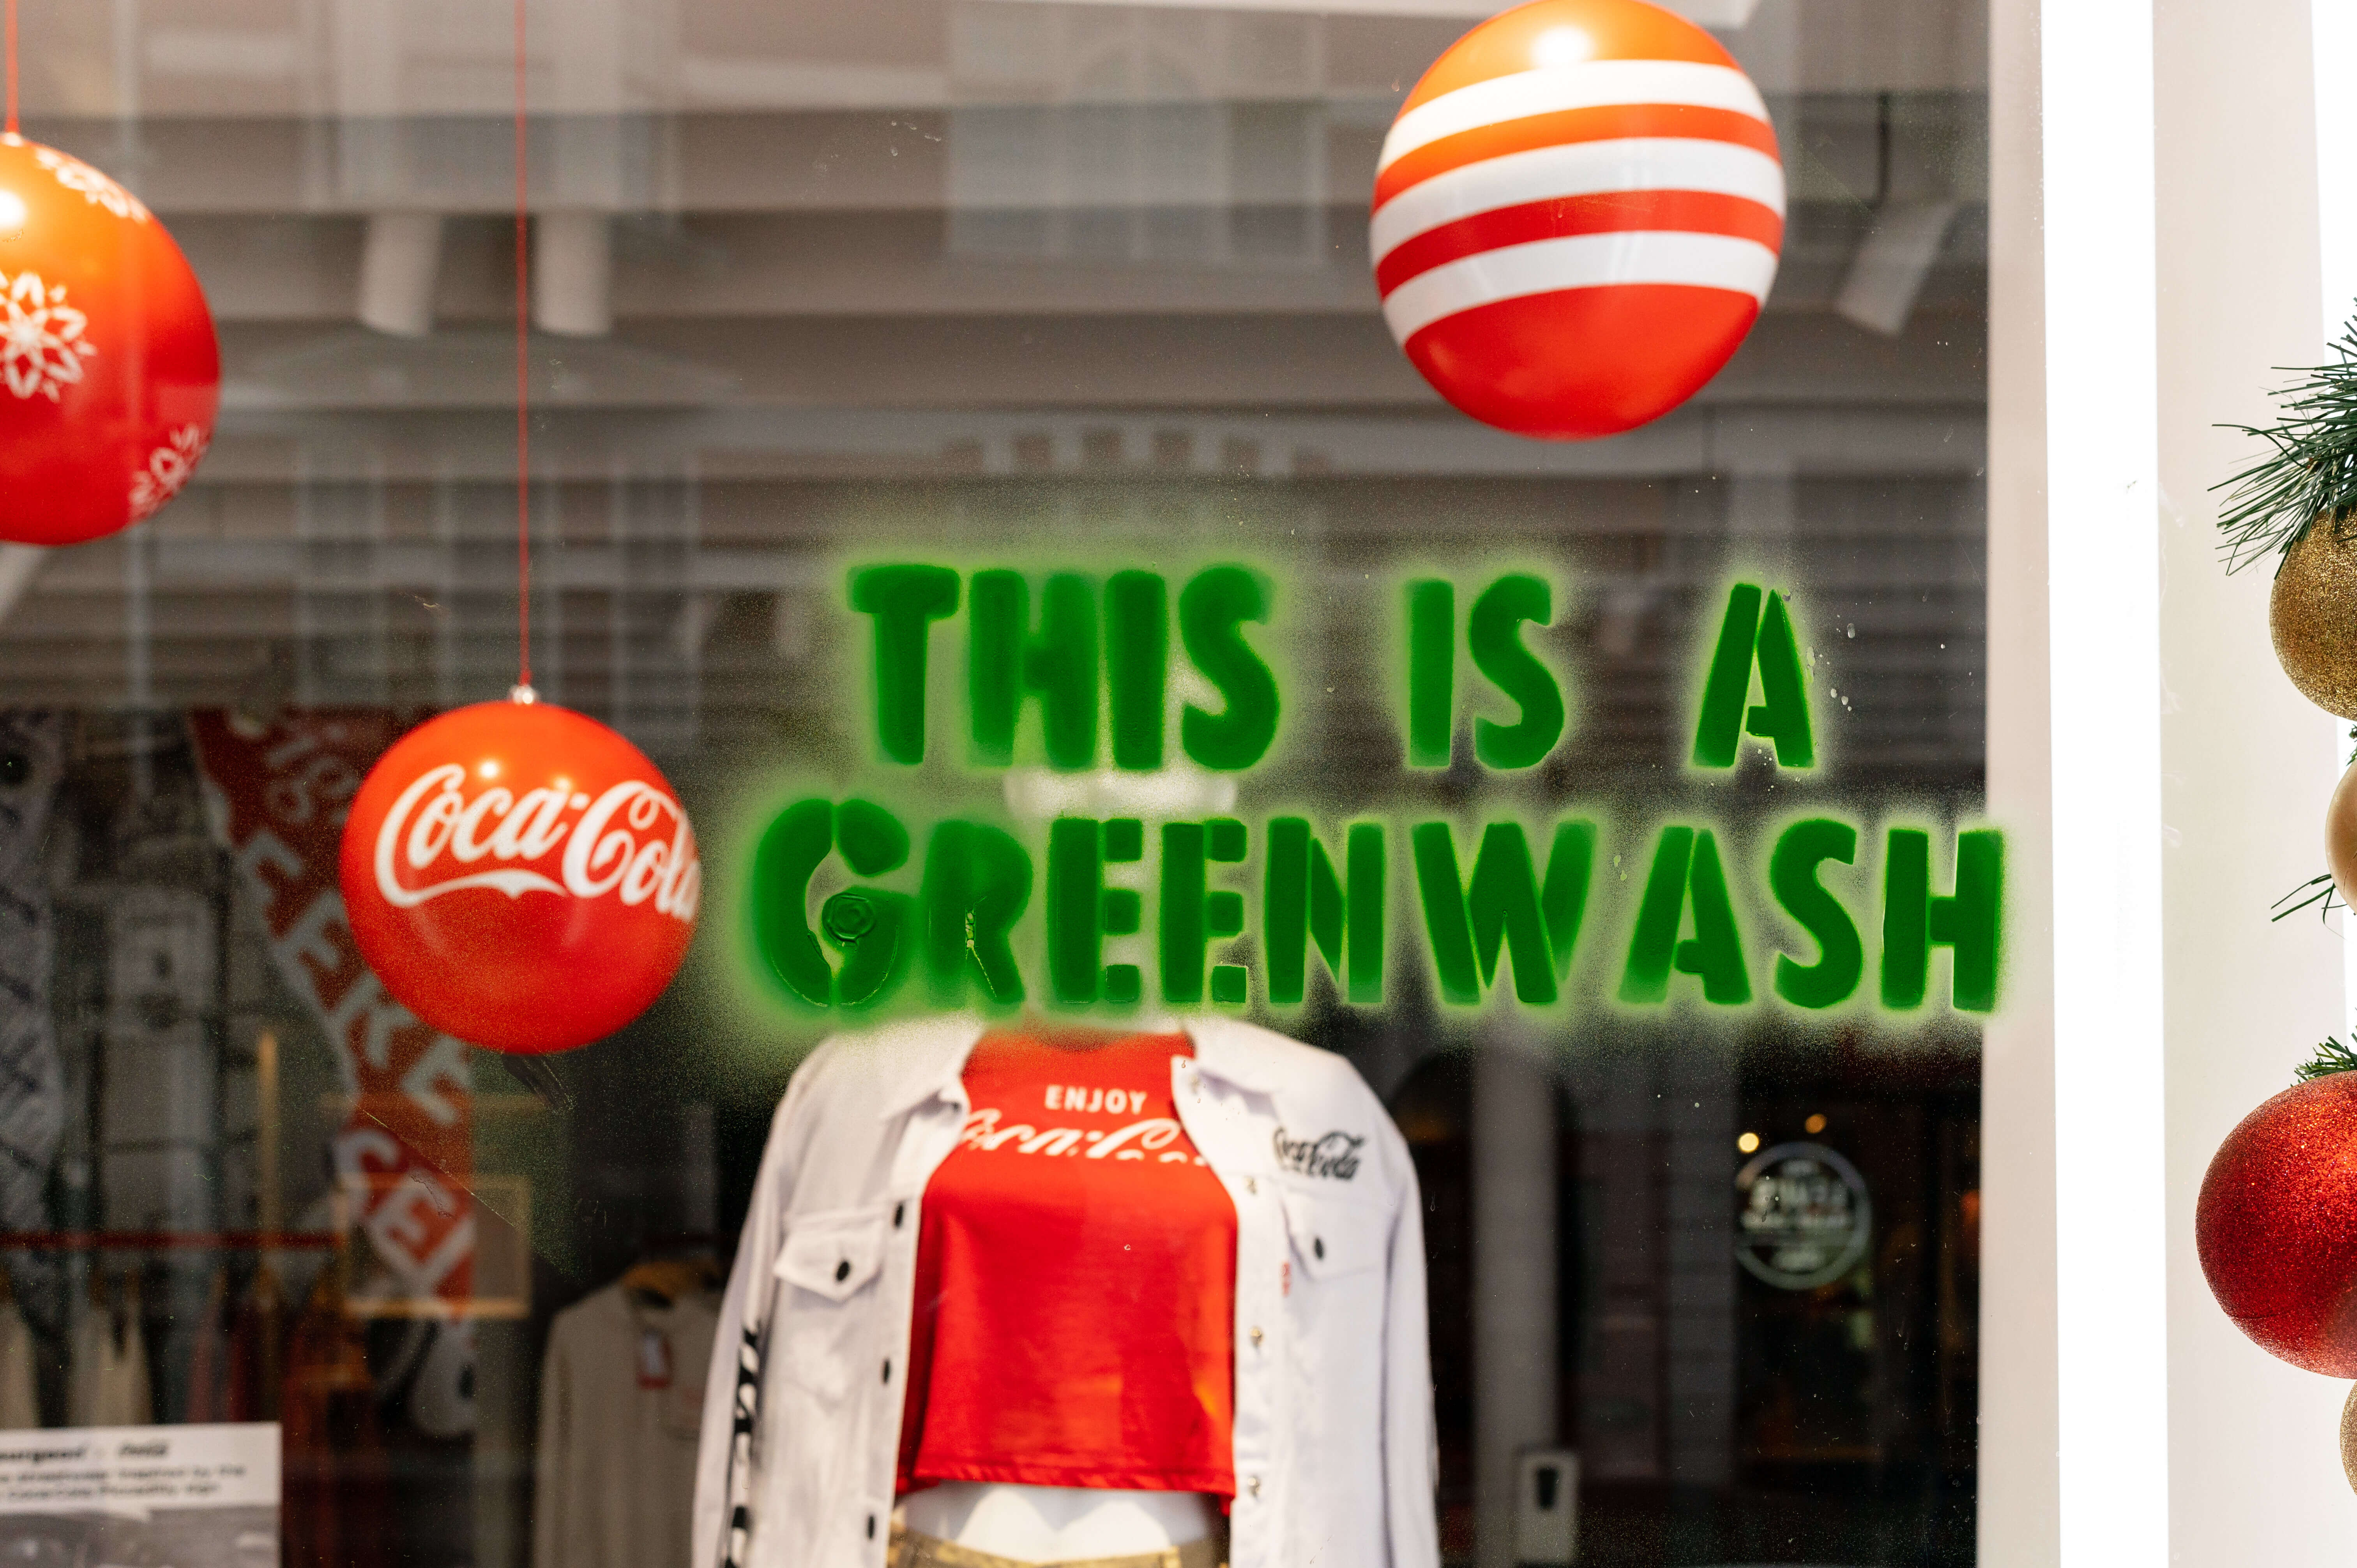 Image shows "This is Greenwash" stencilled onto the front of a Coca-Cola shop in London